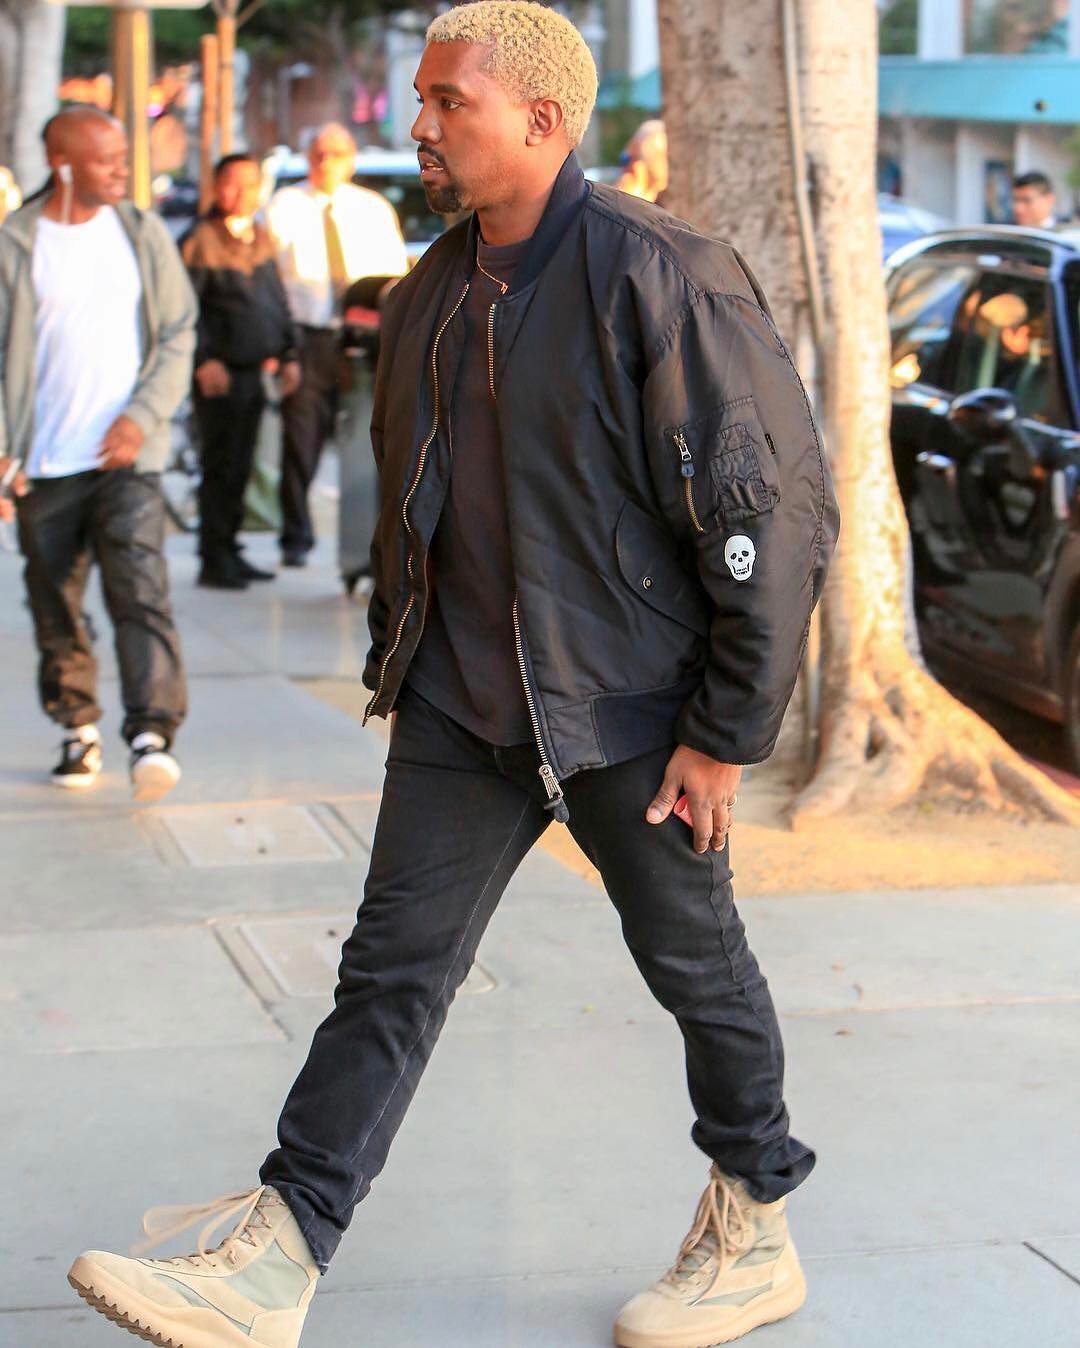 SPOTTED: Kanye West In Archive Raf Simons Bomber And Yeezy Season